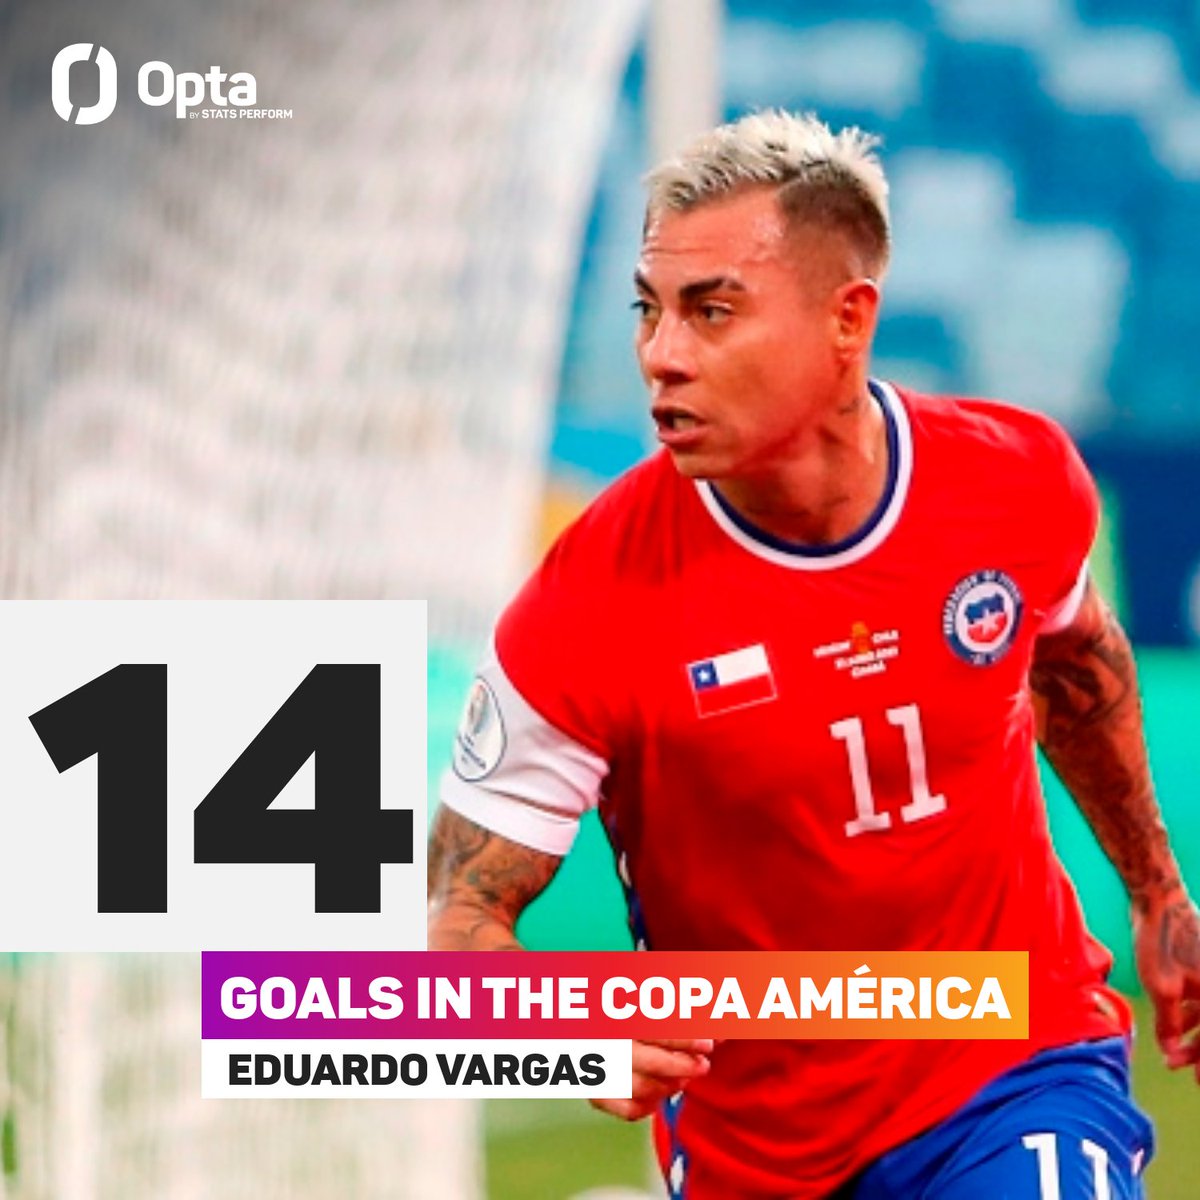 Optajoao 14 Eduardo Vargas Has Scored His 14th Goal In The Copa America He S The Fifth Joint Most Scorer In The Tournament Tied With Paolo Guerrero And With Three Goals